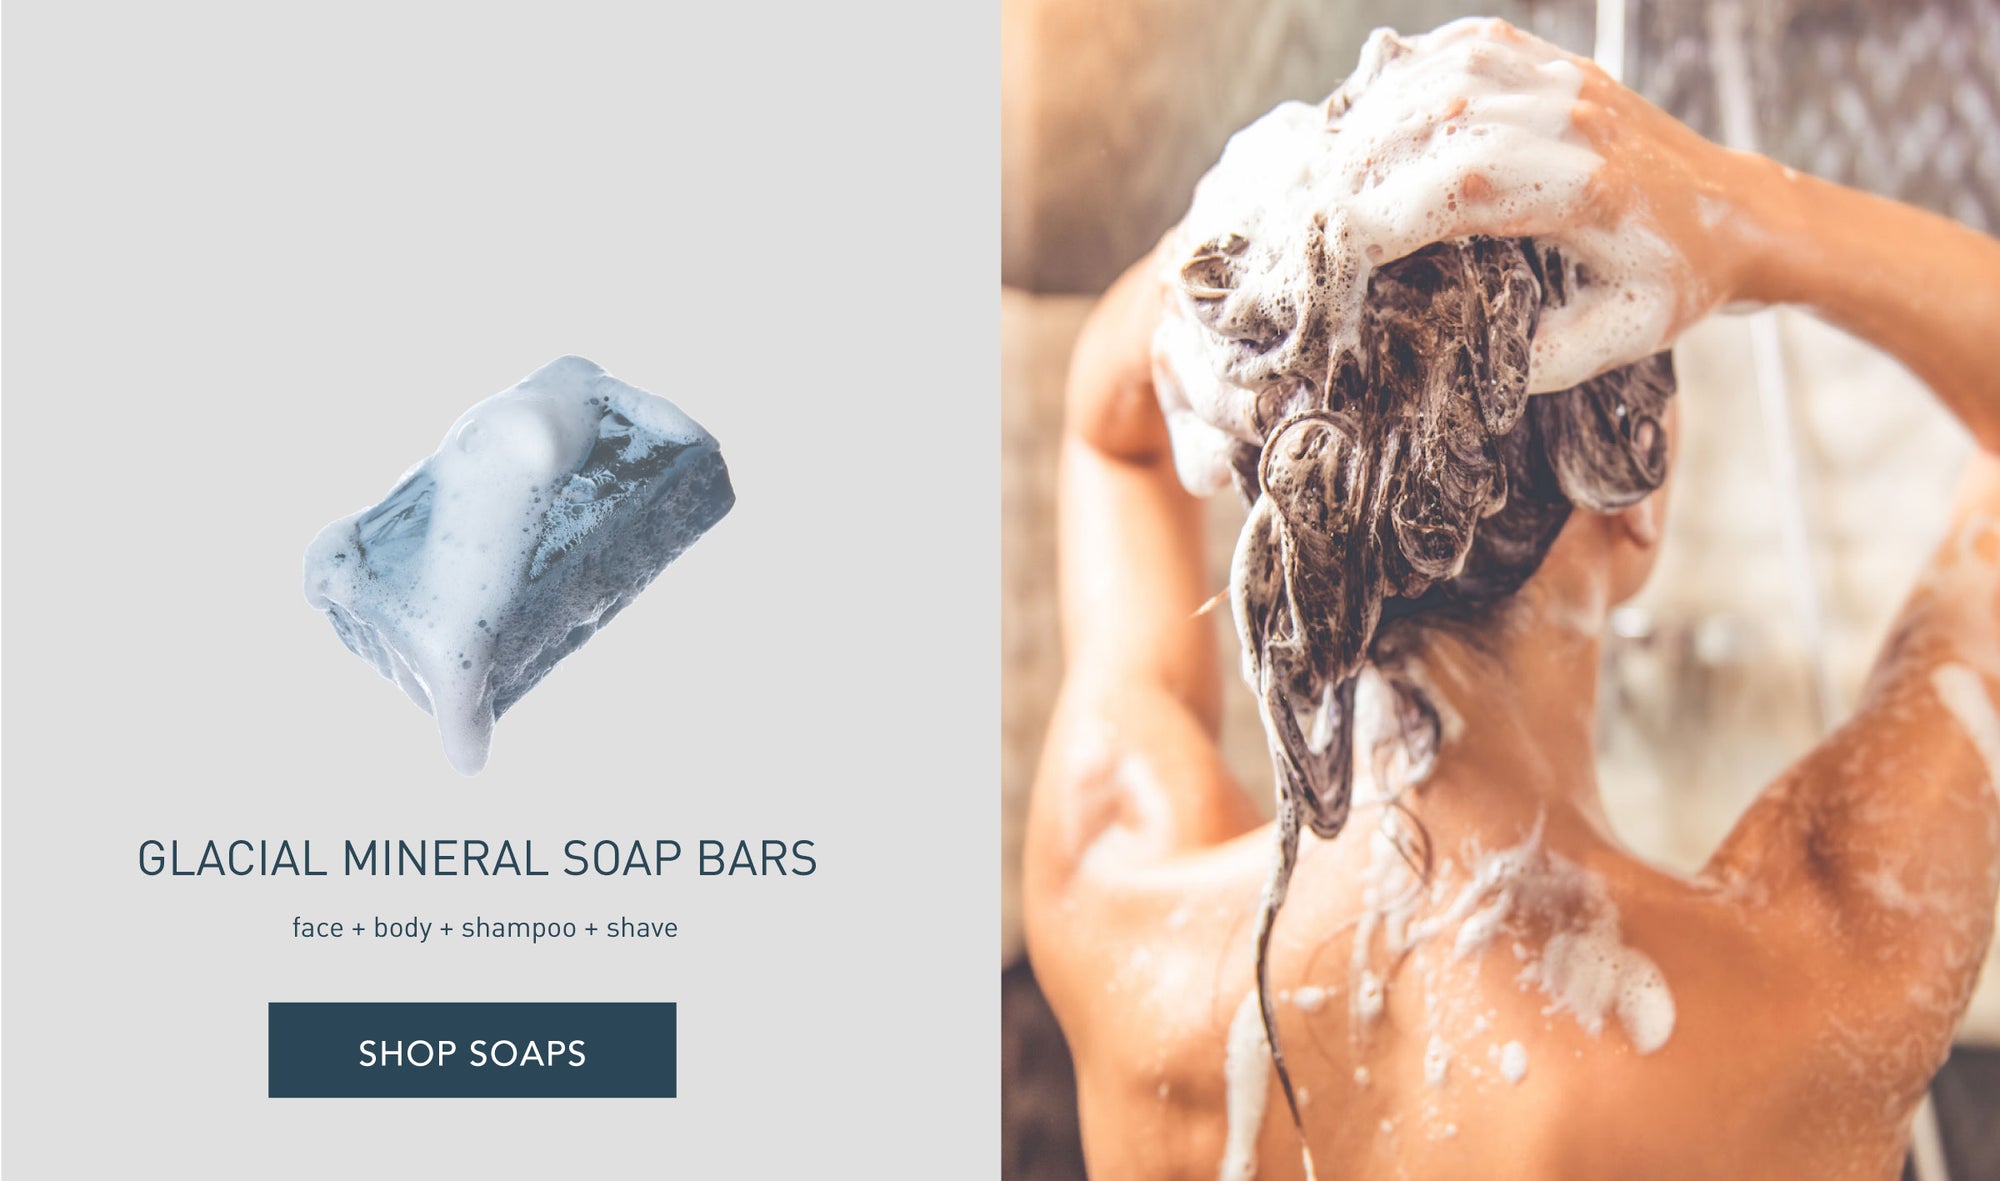 woman shampooing hair with link to shop shampoo soap bars